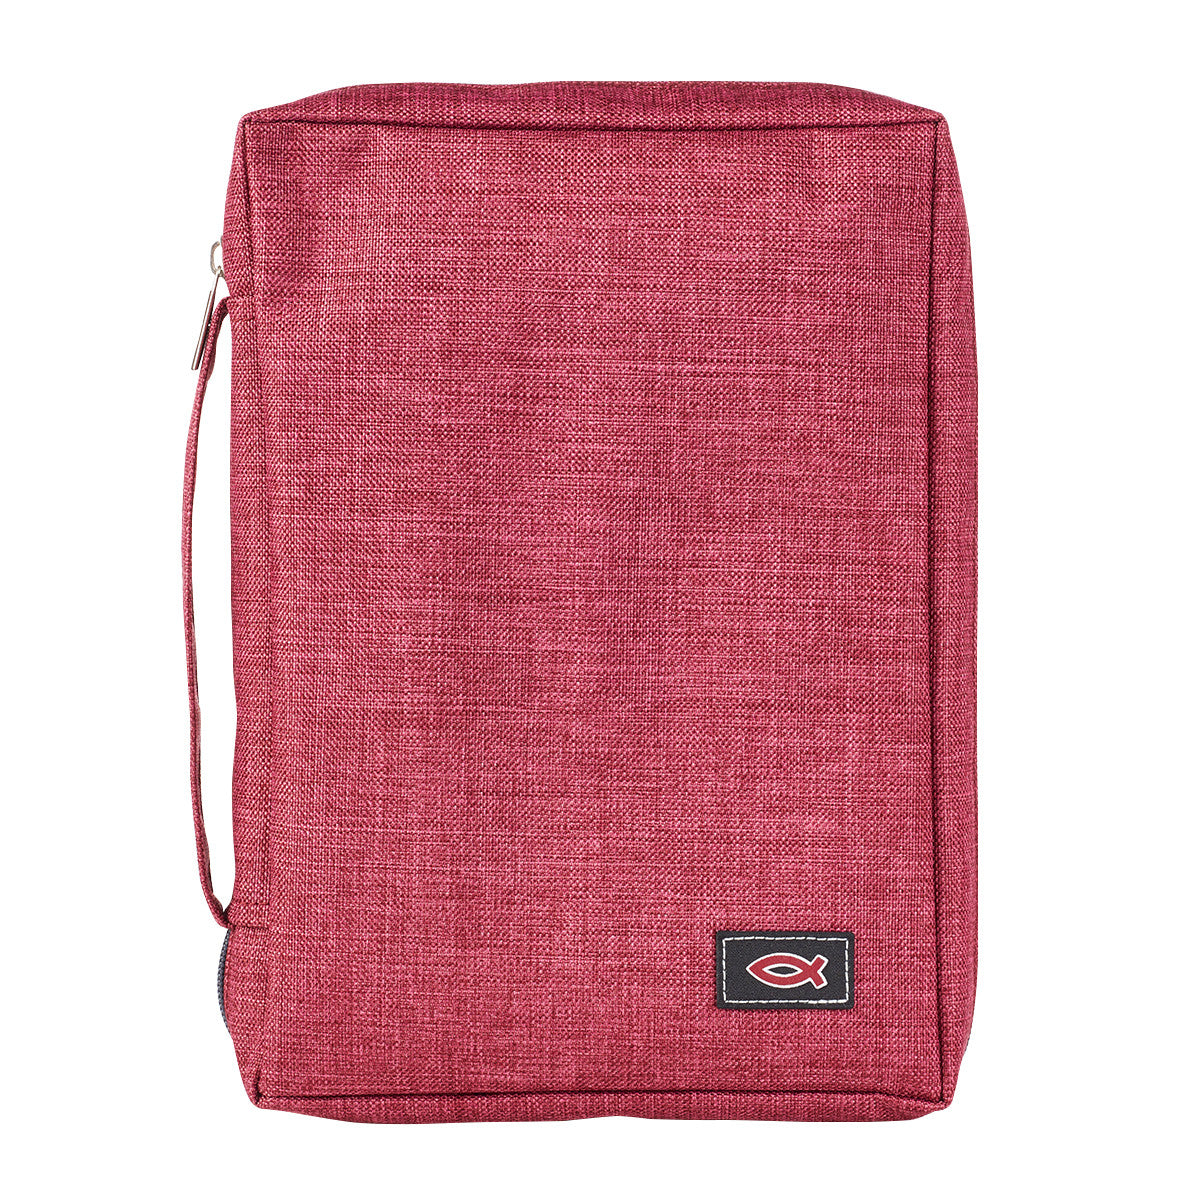 Burgundy Poly-Canvas Value Bible Cover with Fish Badge